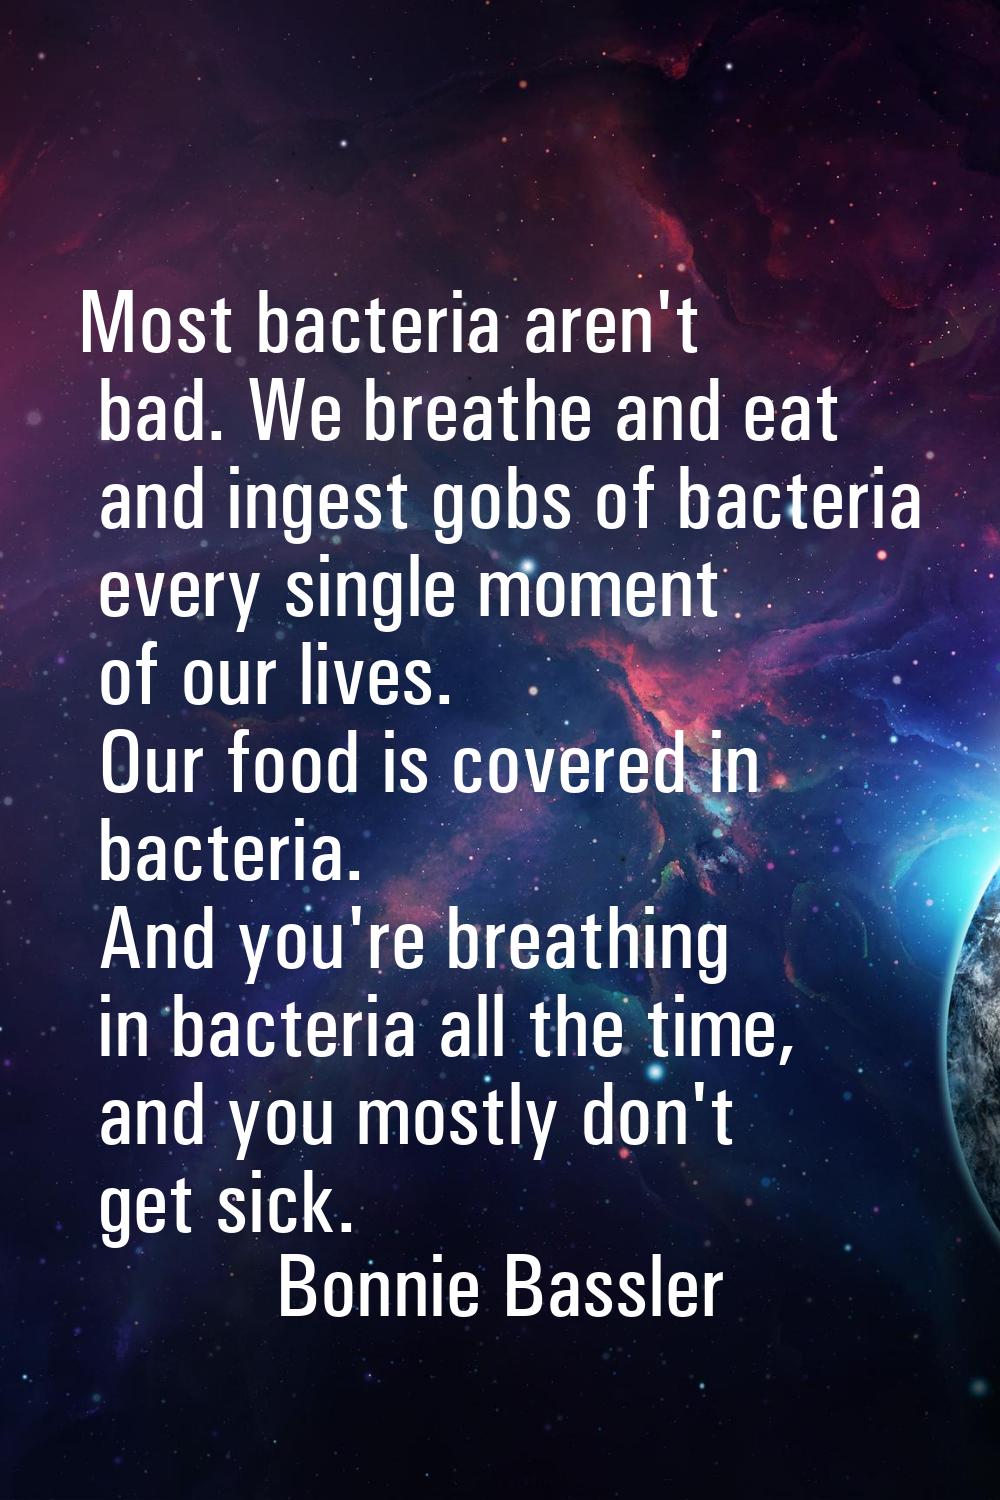 Most bacteria aren't bad. We breathe and eat and ingest gobs of bacteria every single moment of our